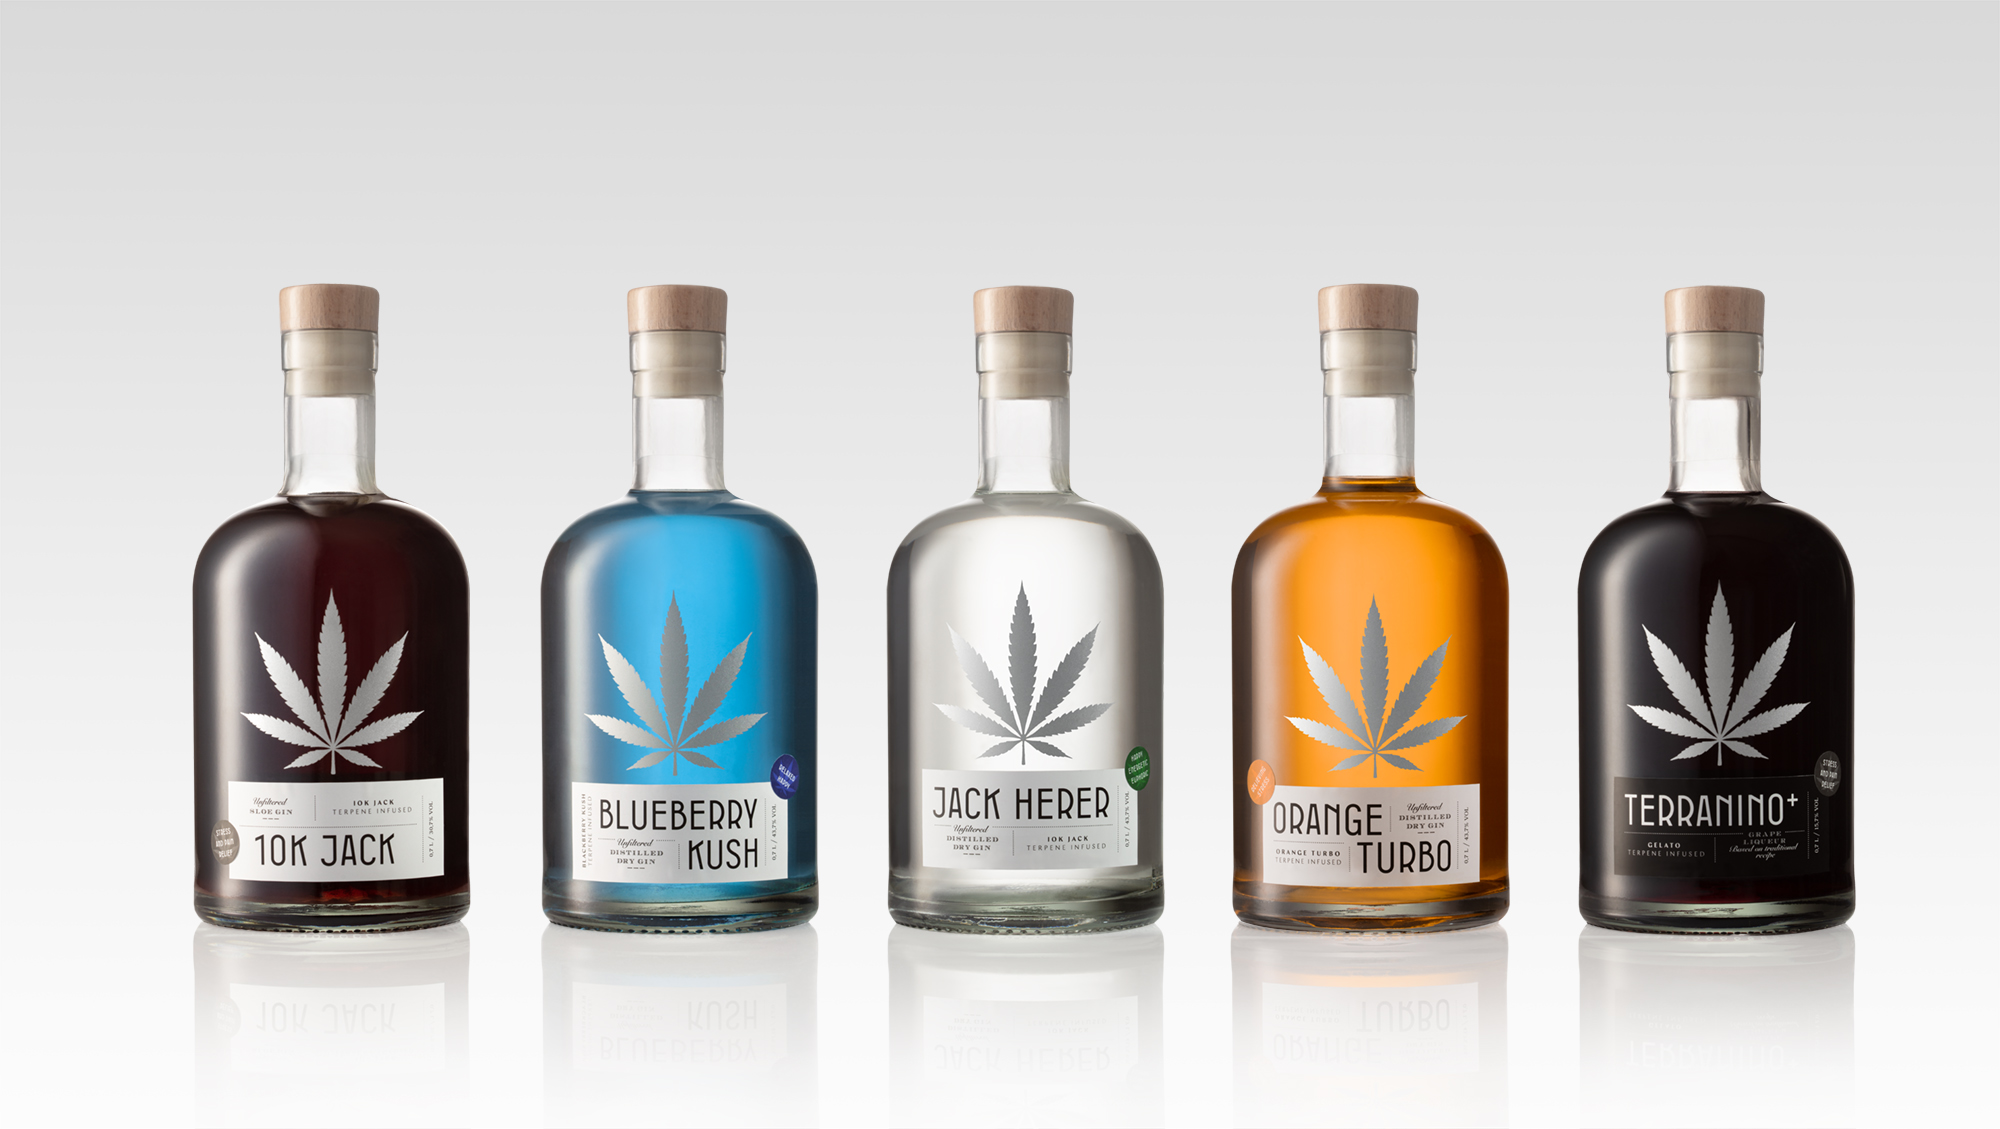 Carasman continues to win awards with its range of gin